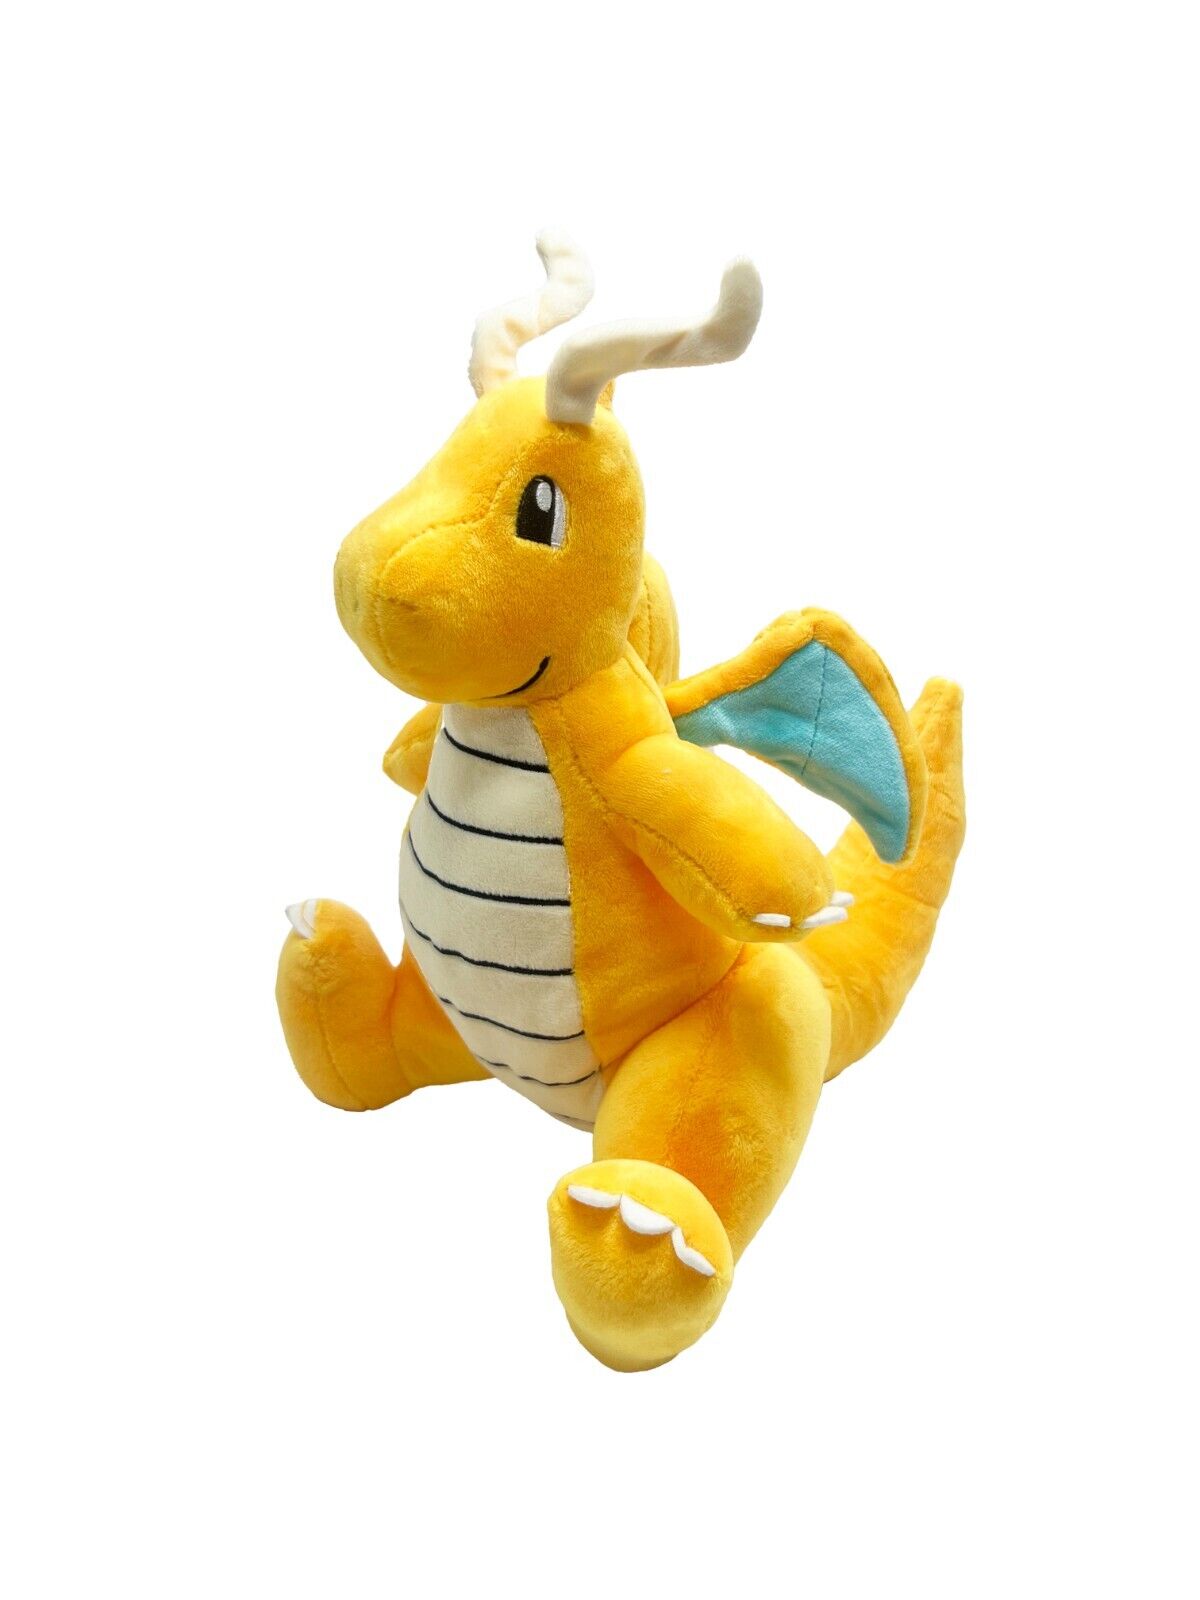 Pokemon -Dragonite Plush Toy- New -Comes with Tags-12 inch